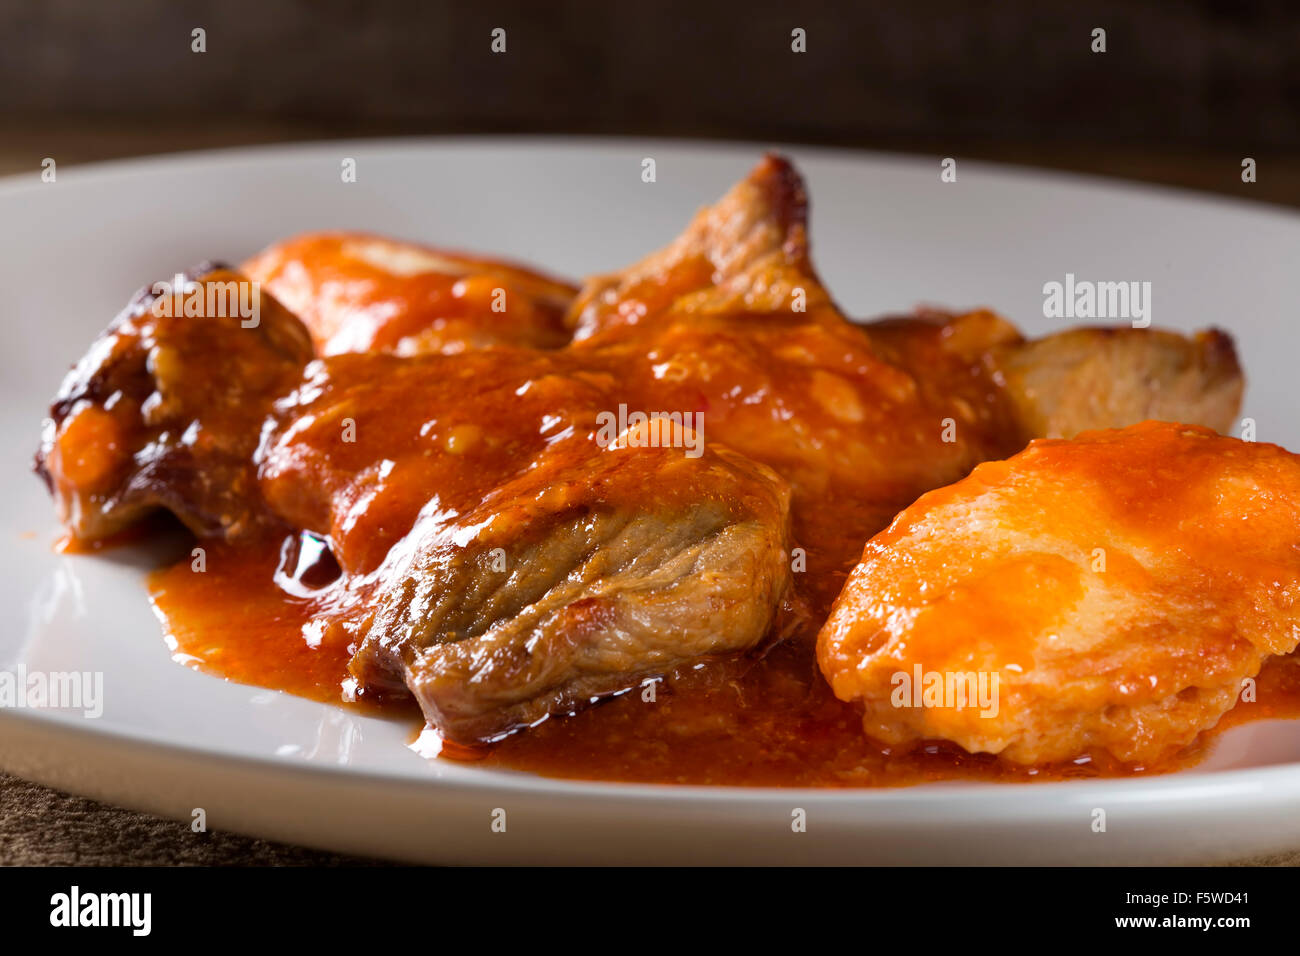 Plate with stew of pork meat (goulash) and dumplings Stock Photo